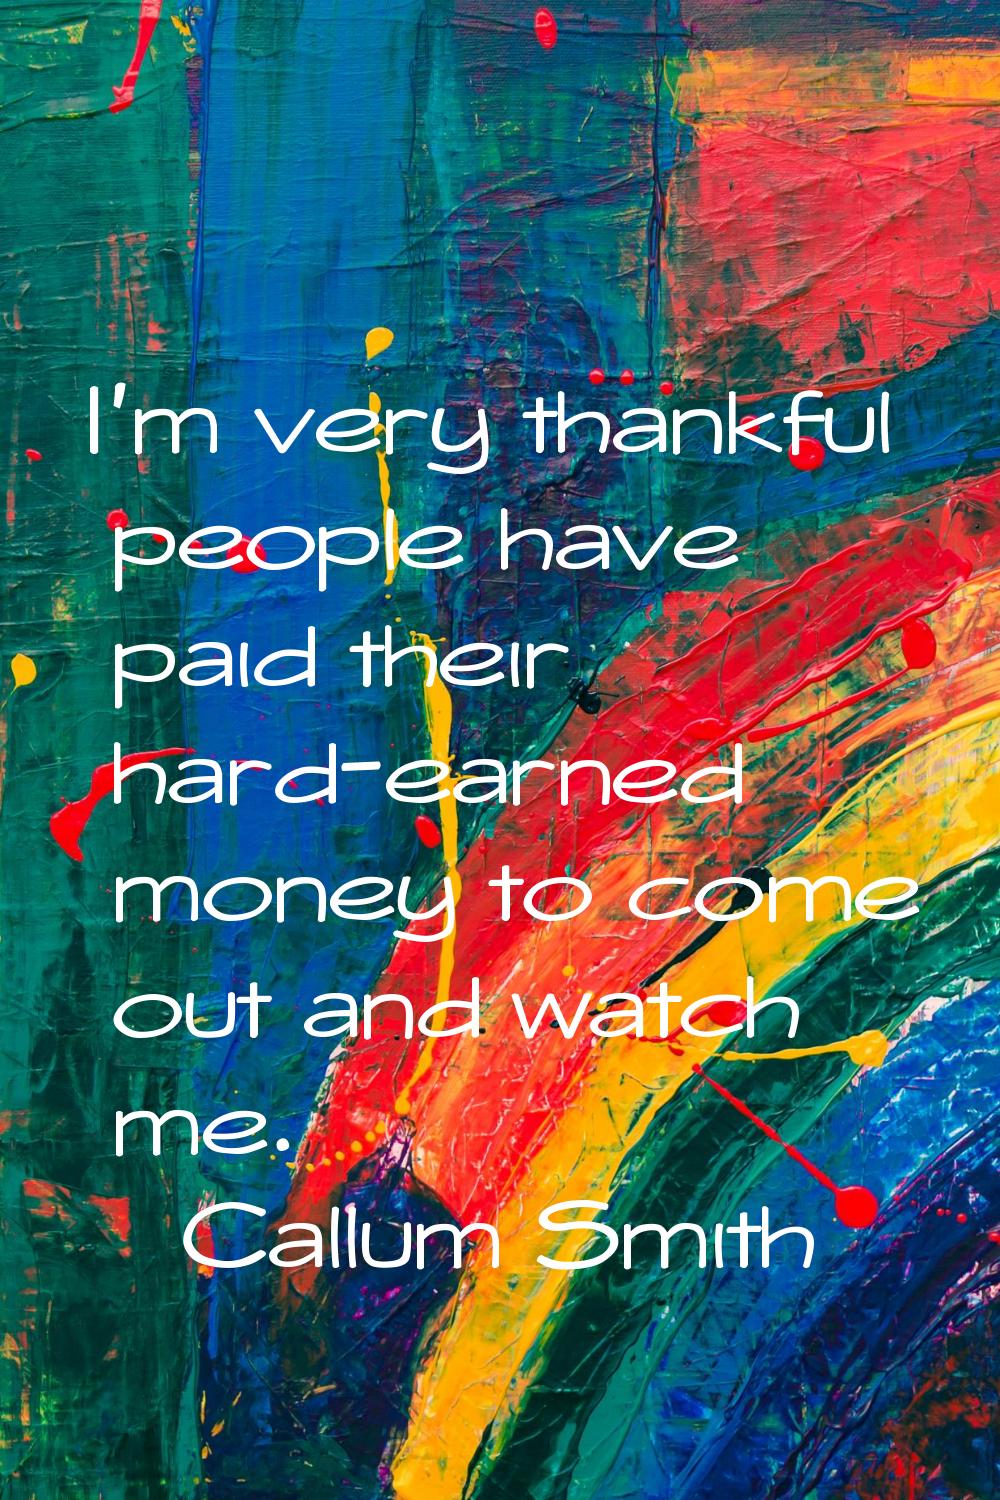 I'm very thankful people have paid their hard-earned money to come out and watch me.